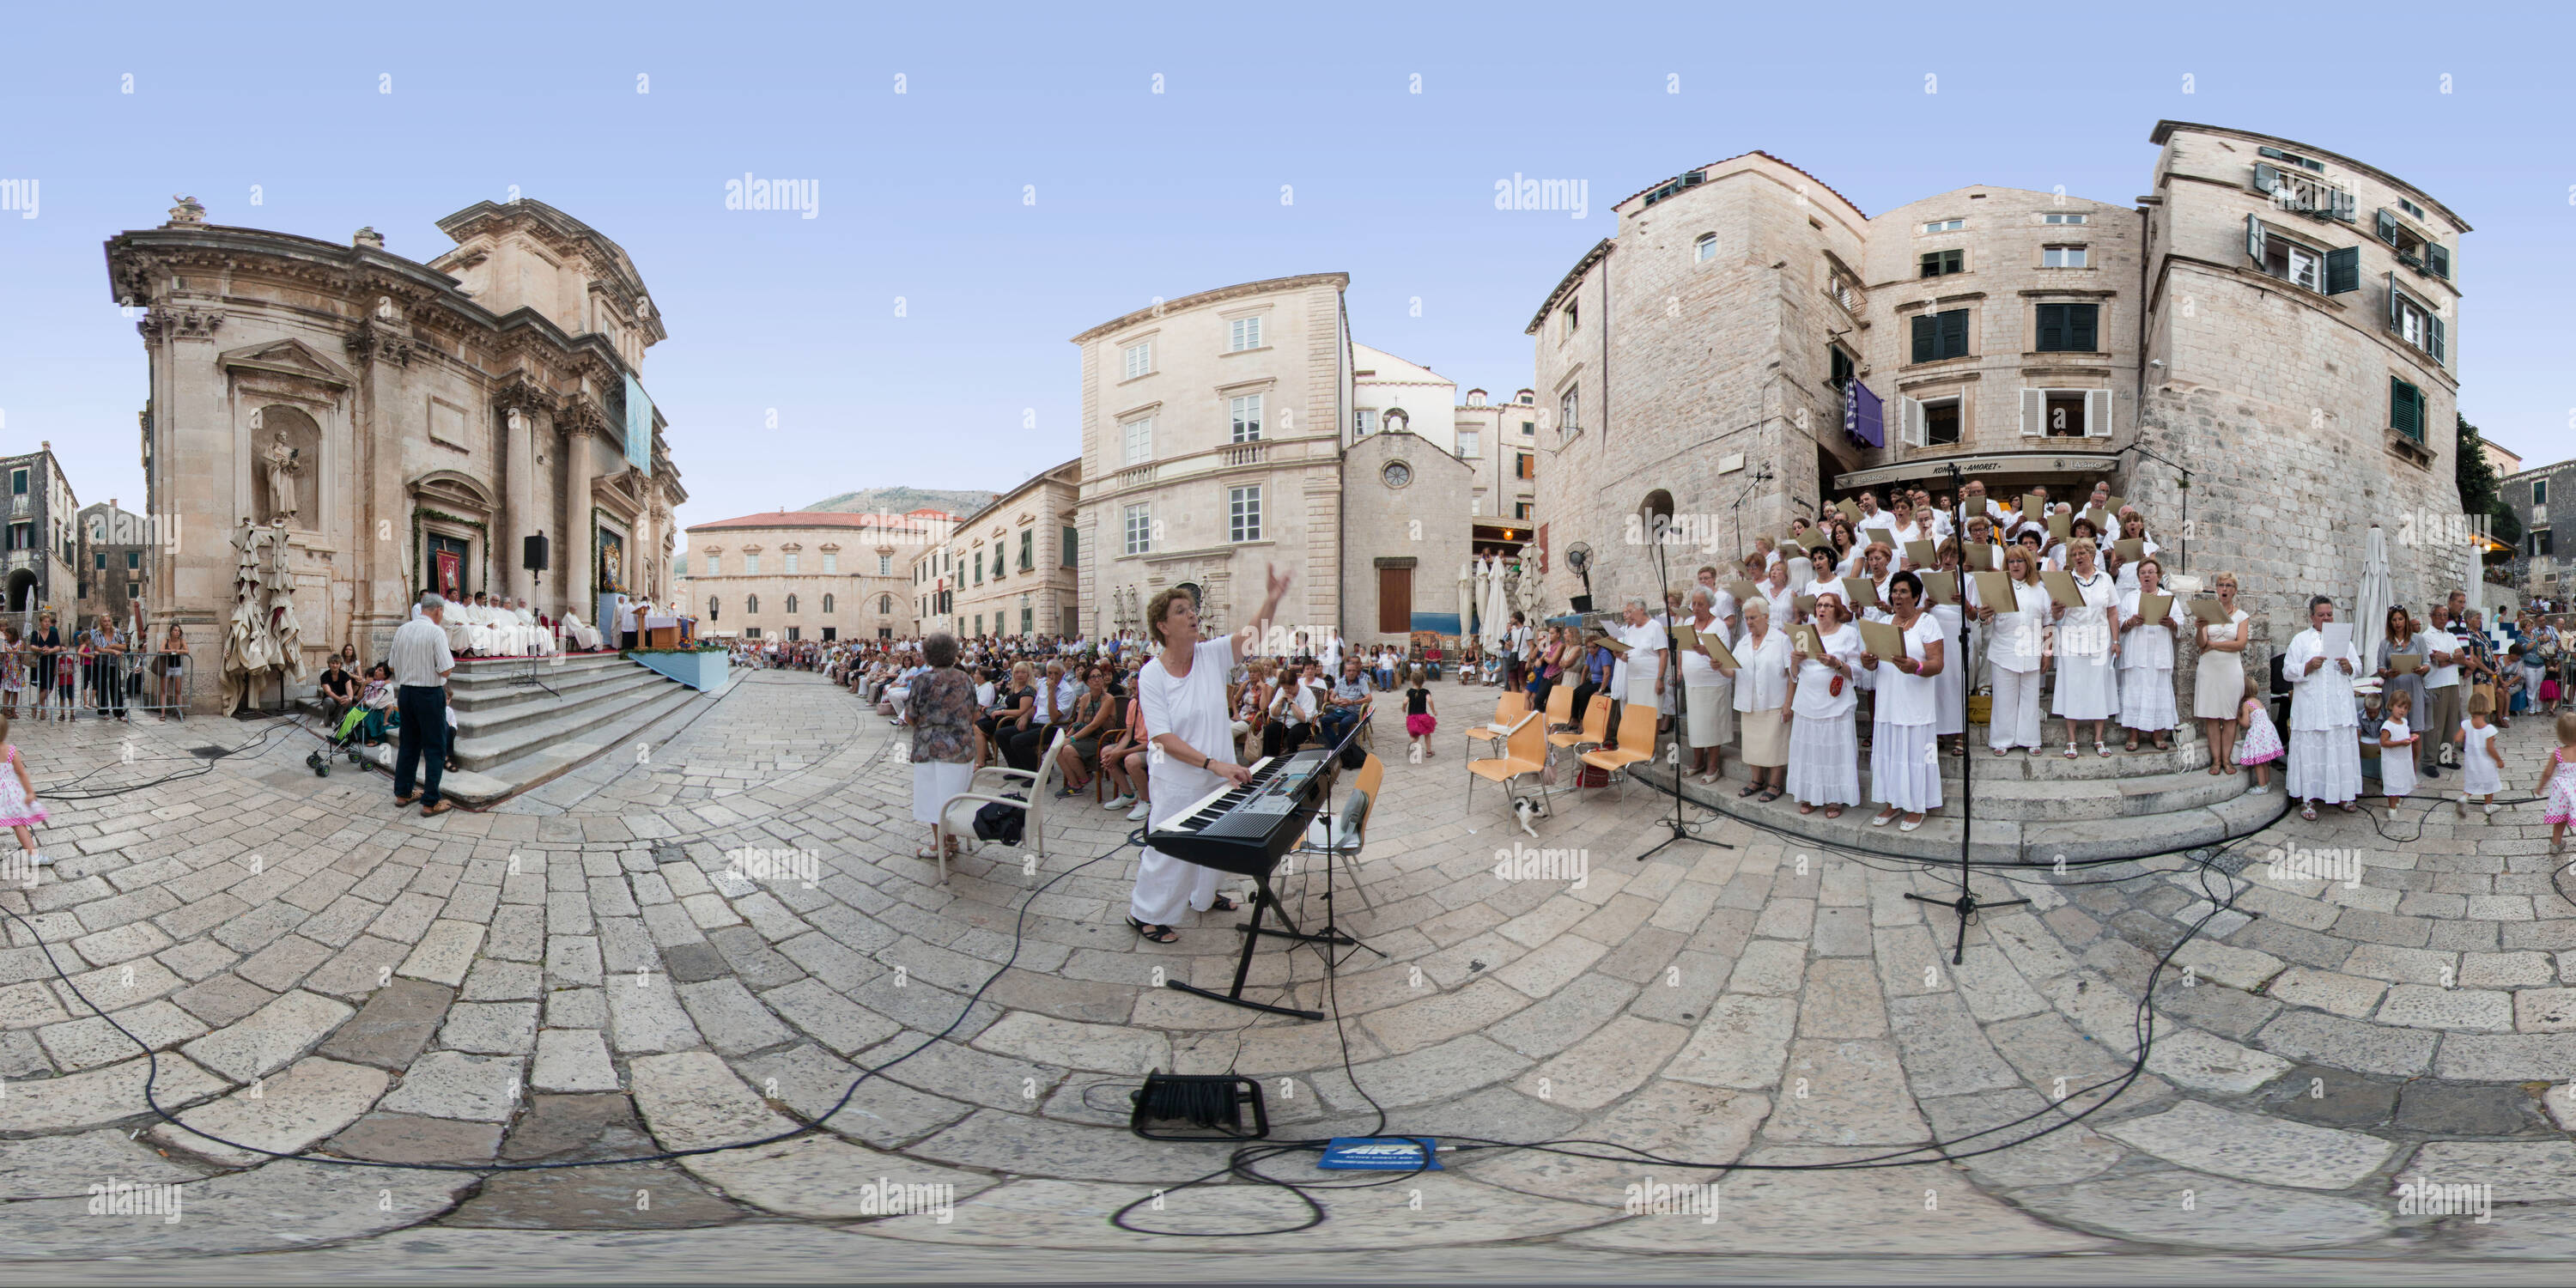 360 degree panoramic view of The Feast of the Assumption of the Blessed Virgin Mary 2013.